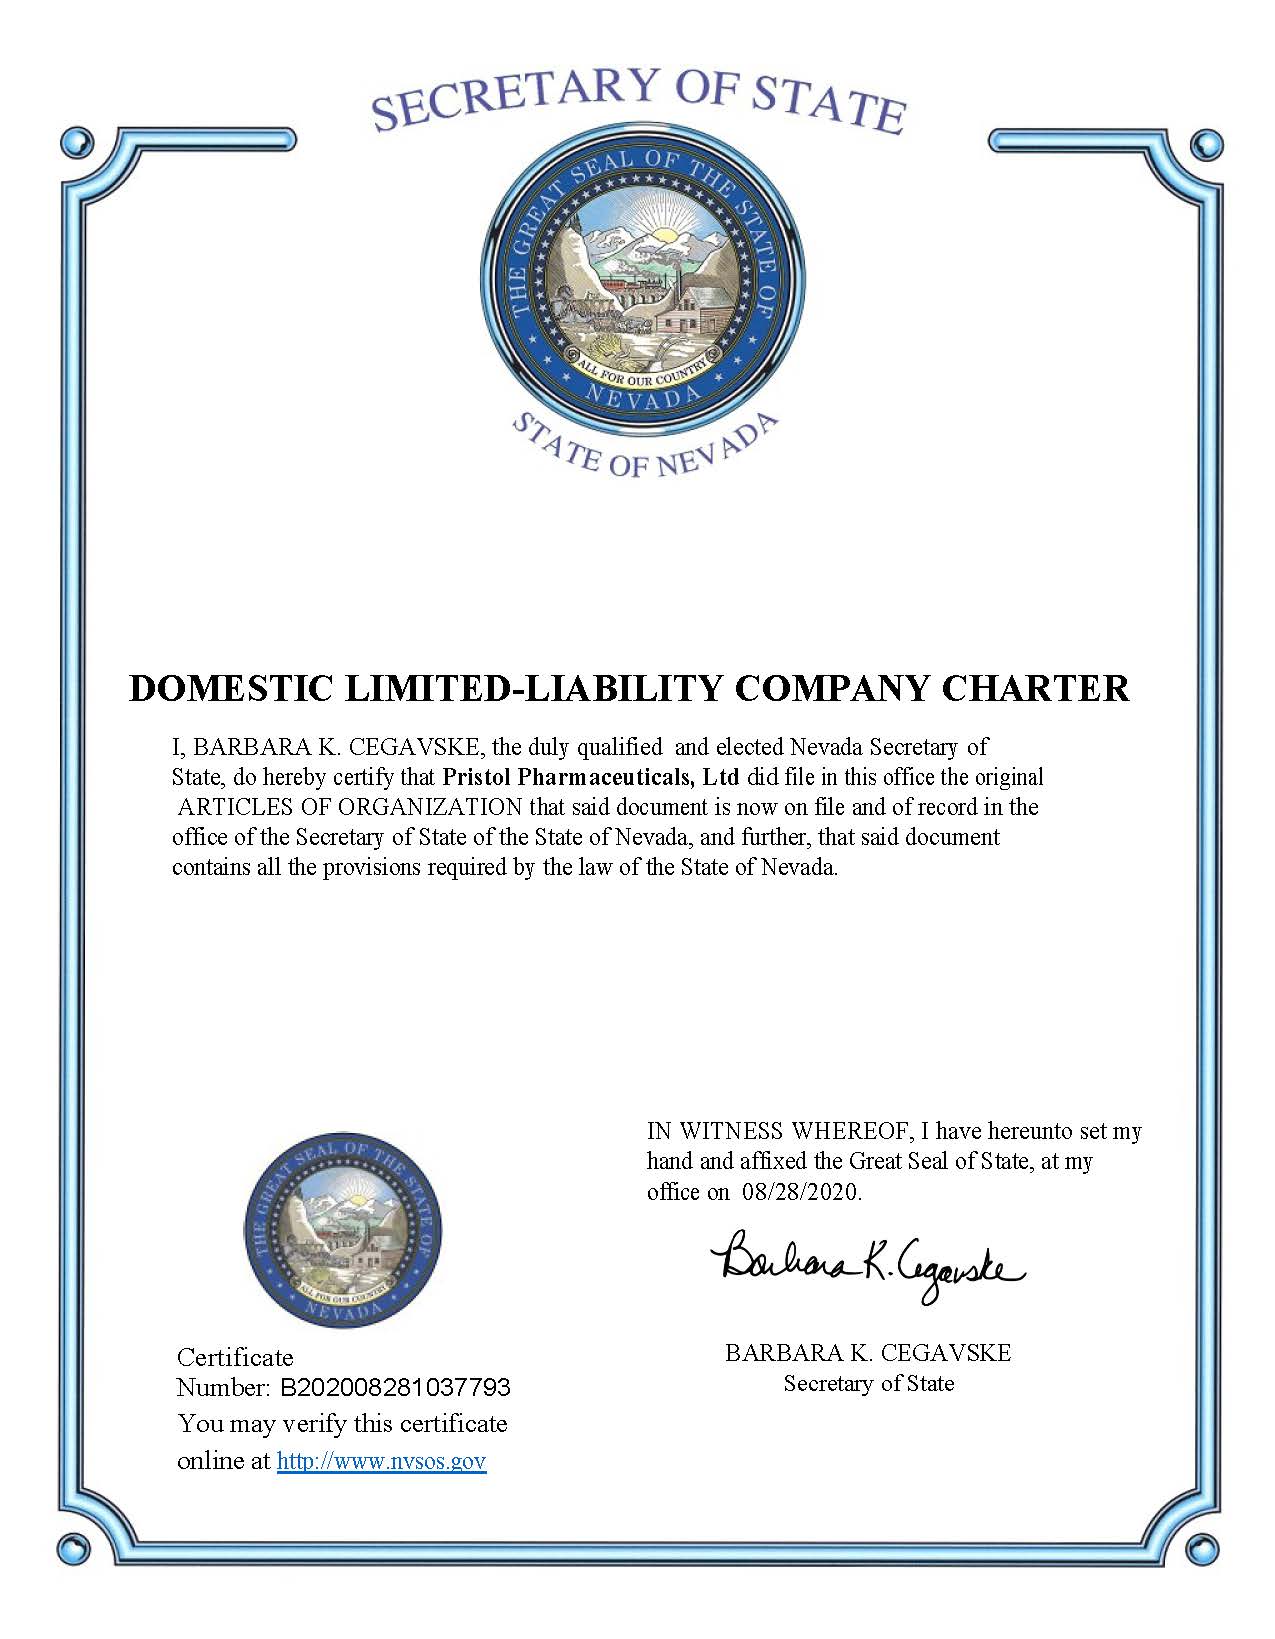 Company Charter Pristol Pharmaceuticals